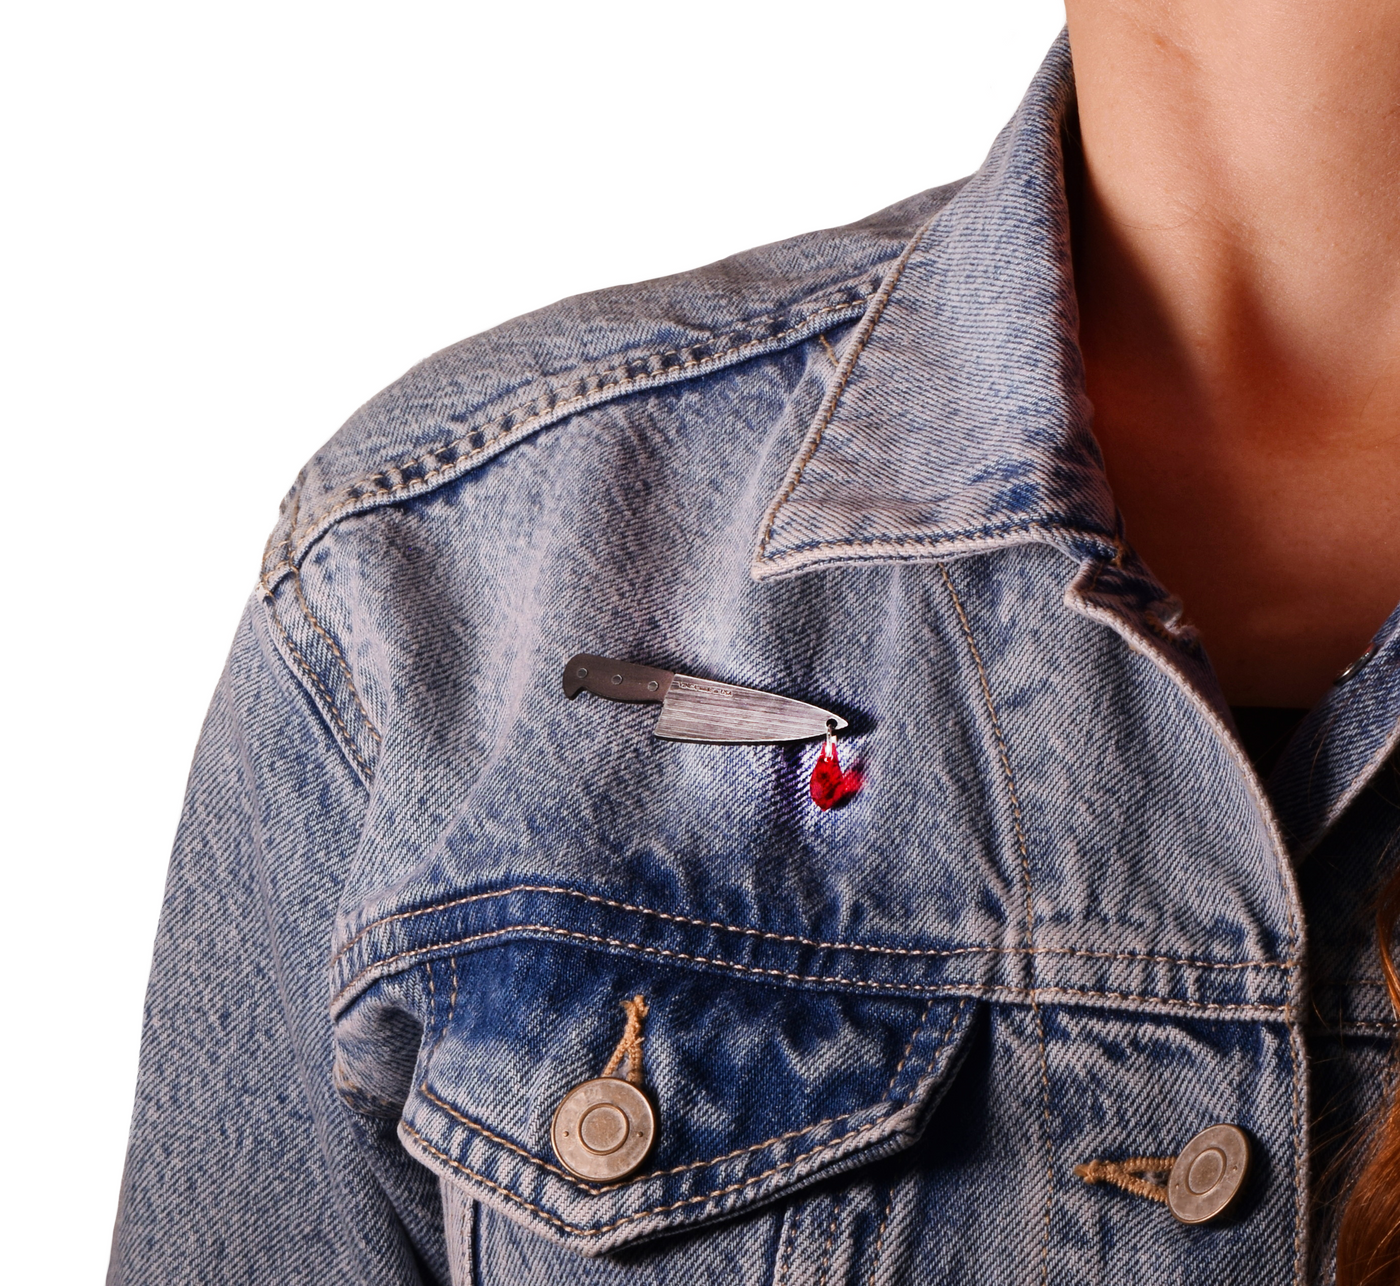 Chef's knife pendant with Austrian crystal blood drop pinned to a jean jacket and worn by a model.